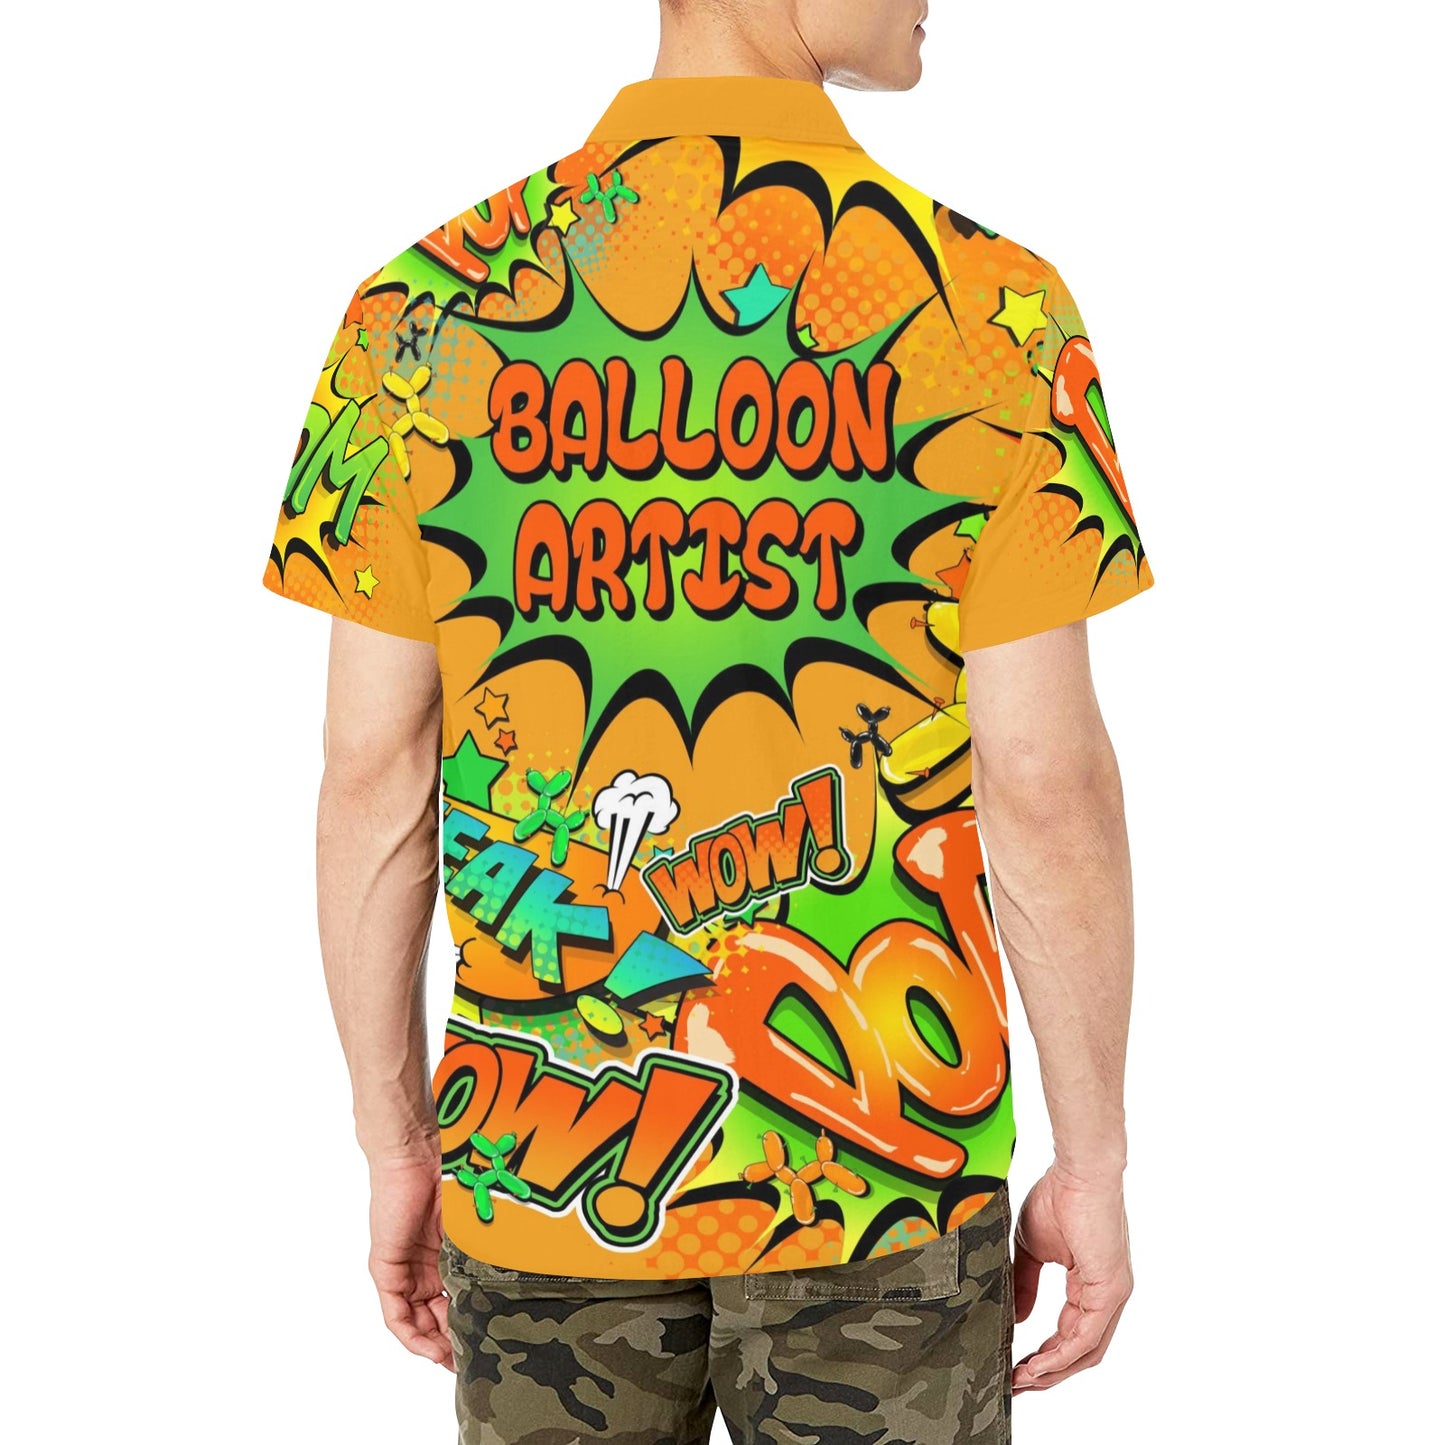 Party shirt for Balloon Twisters and Entertainers in orange and green